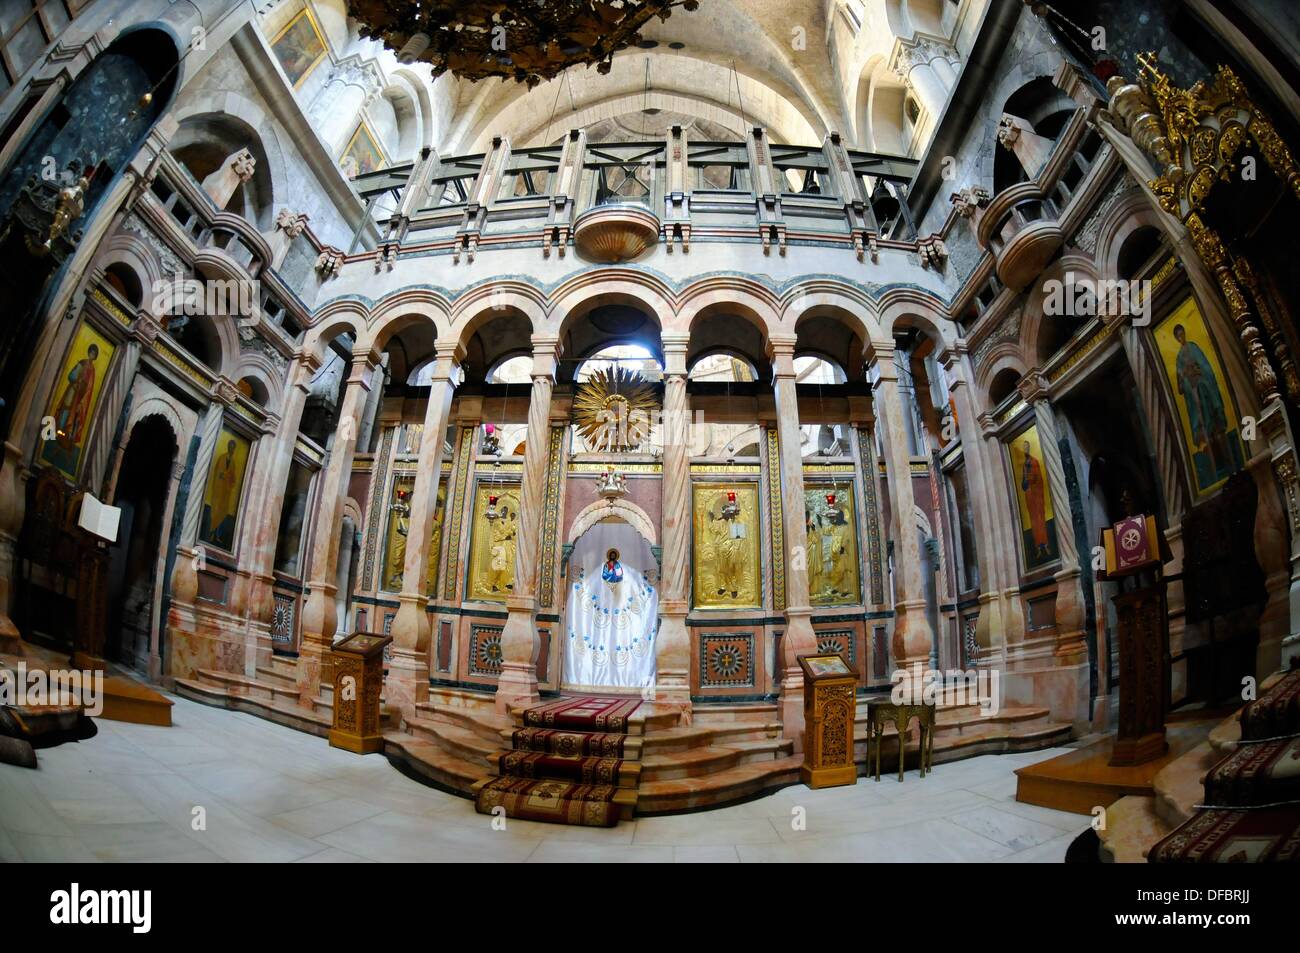 View of the chapel of the Church of the Holy Sepulchre, the supposed place of Jesus' grave and the last five stations of the Via Dolorosa, which is visited daily by thousands of pilgrims and tourists in Jerusalem, Israel, 10 September 2013. The Via Dolorosa (Way of Suffering) is a street in the old town of Jerusalem named after the path Jesus of Nazareth walked to his crucification. Jesus carried the cross, on which he later died via that road from the Antonia Fortress, then seat of Pilate, to Golgotha, the place where his grave is supposedly located. Above this place, the Church of the Holy S Stock Photo